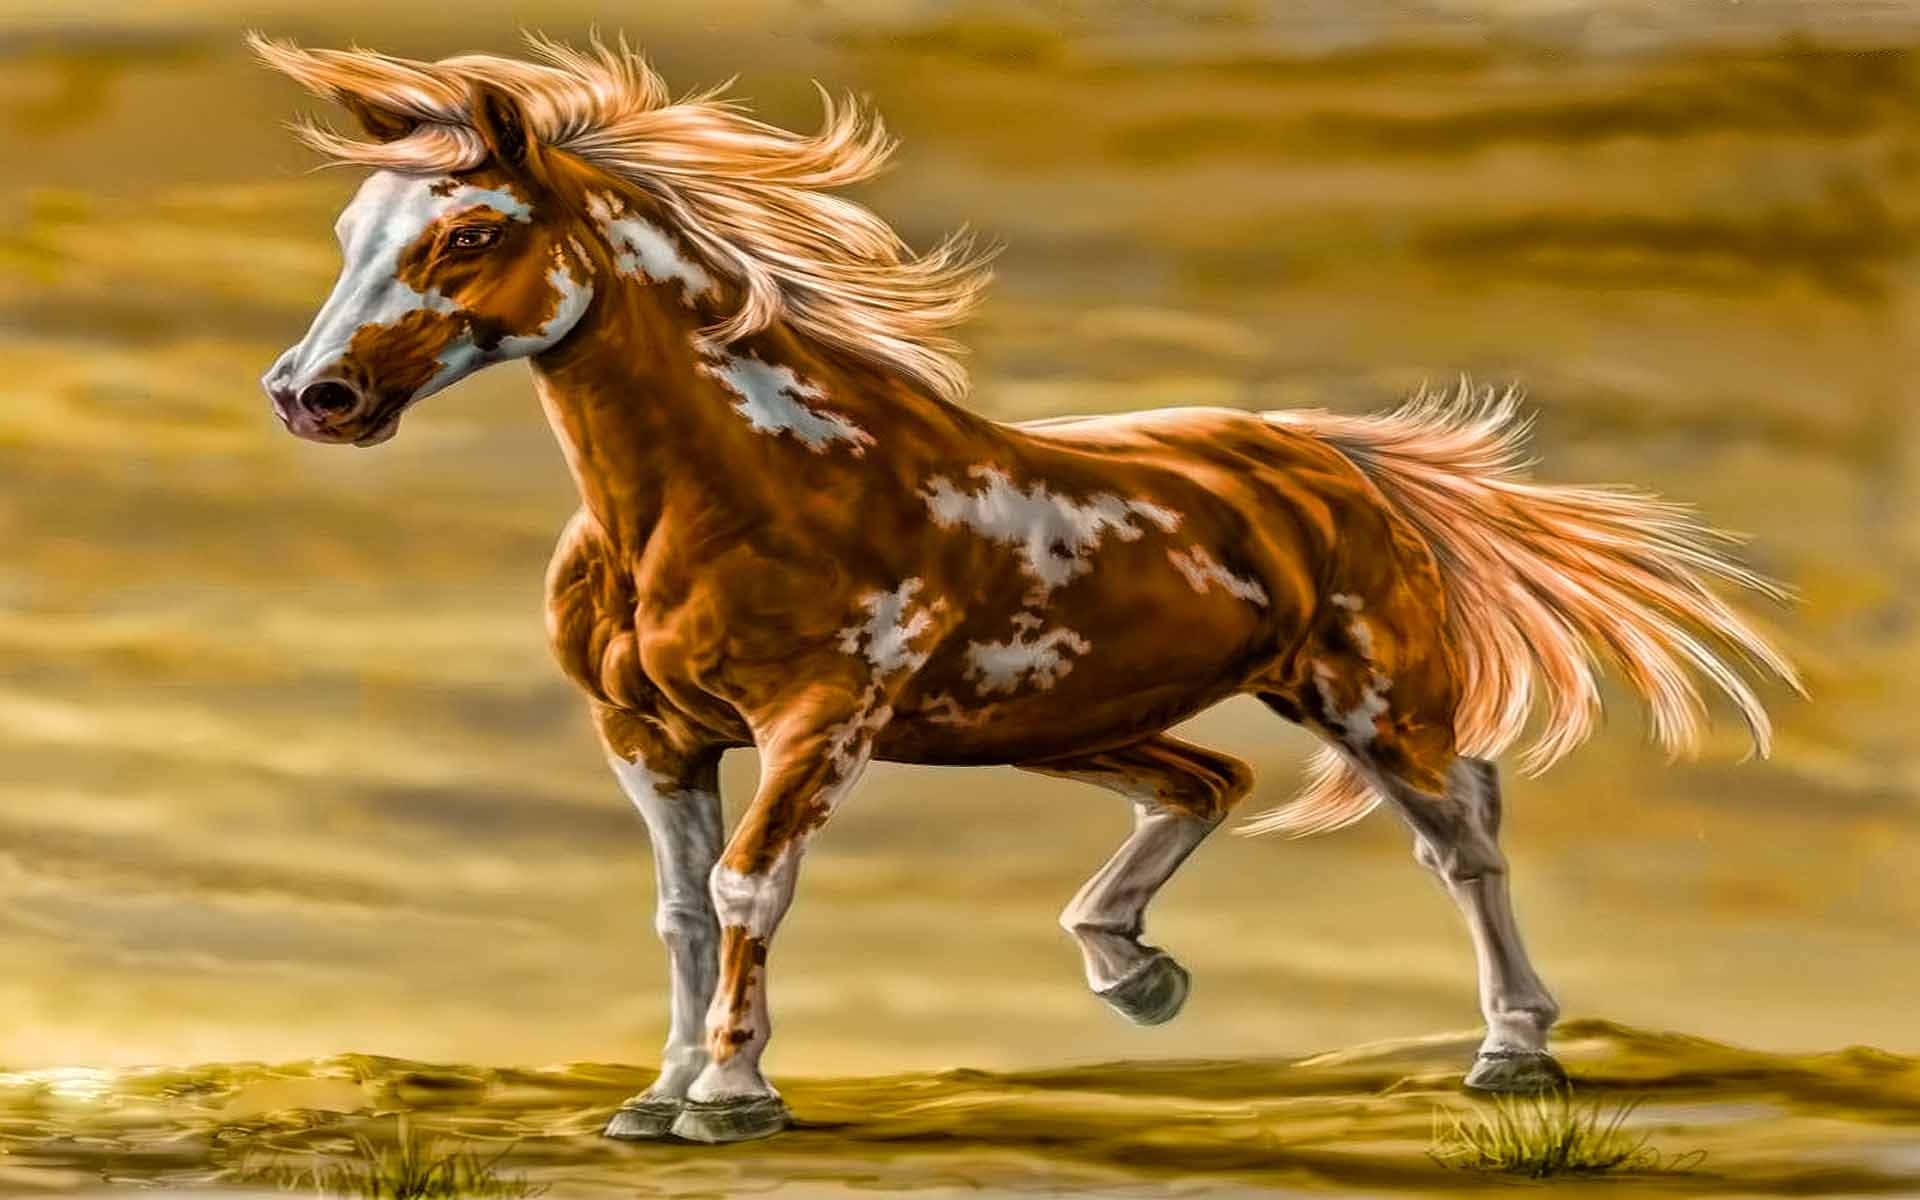 A fire-breasted bay horse standing elegantly against a midnight sky Wallpaper